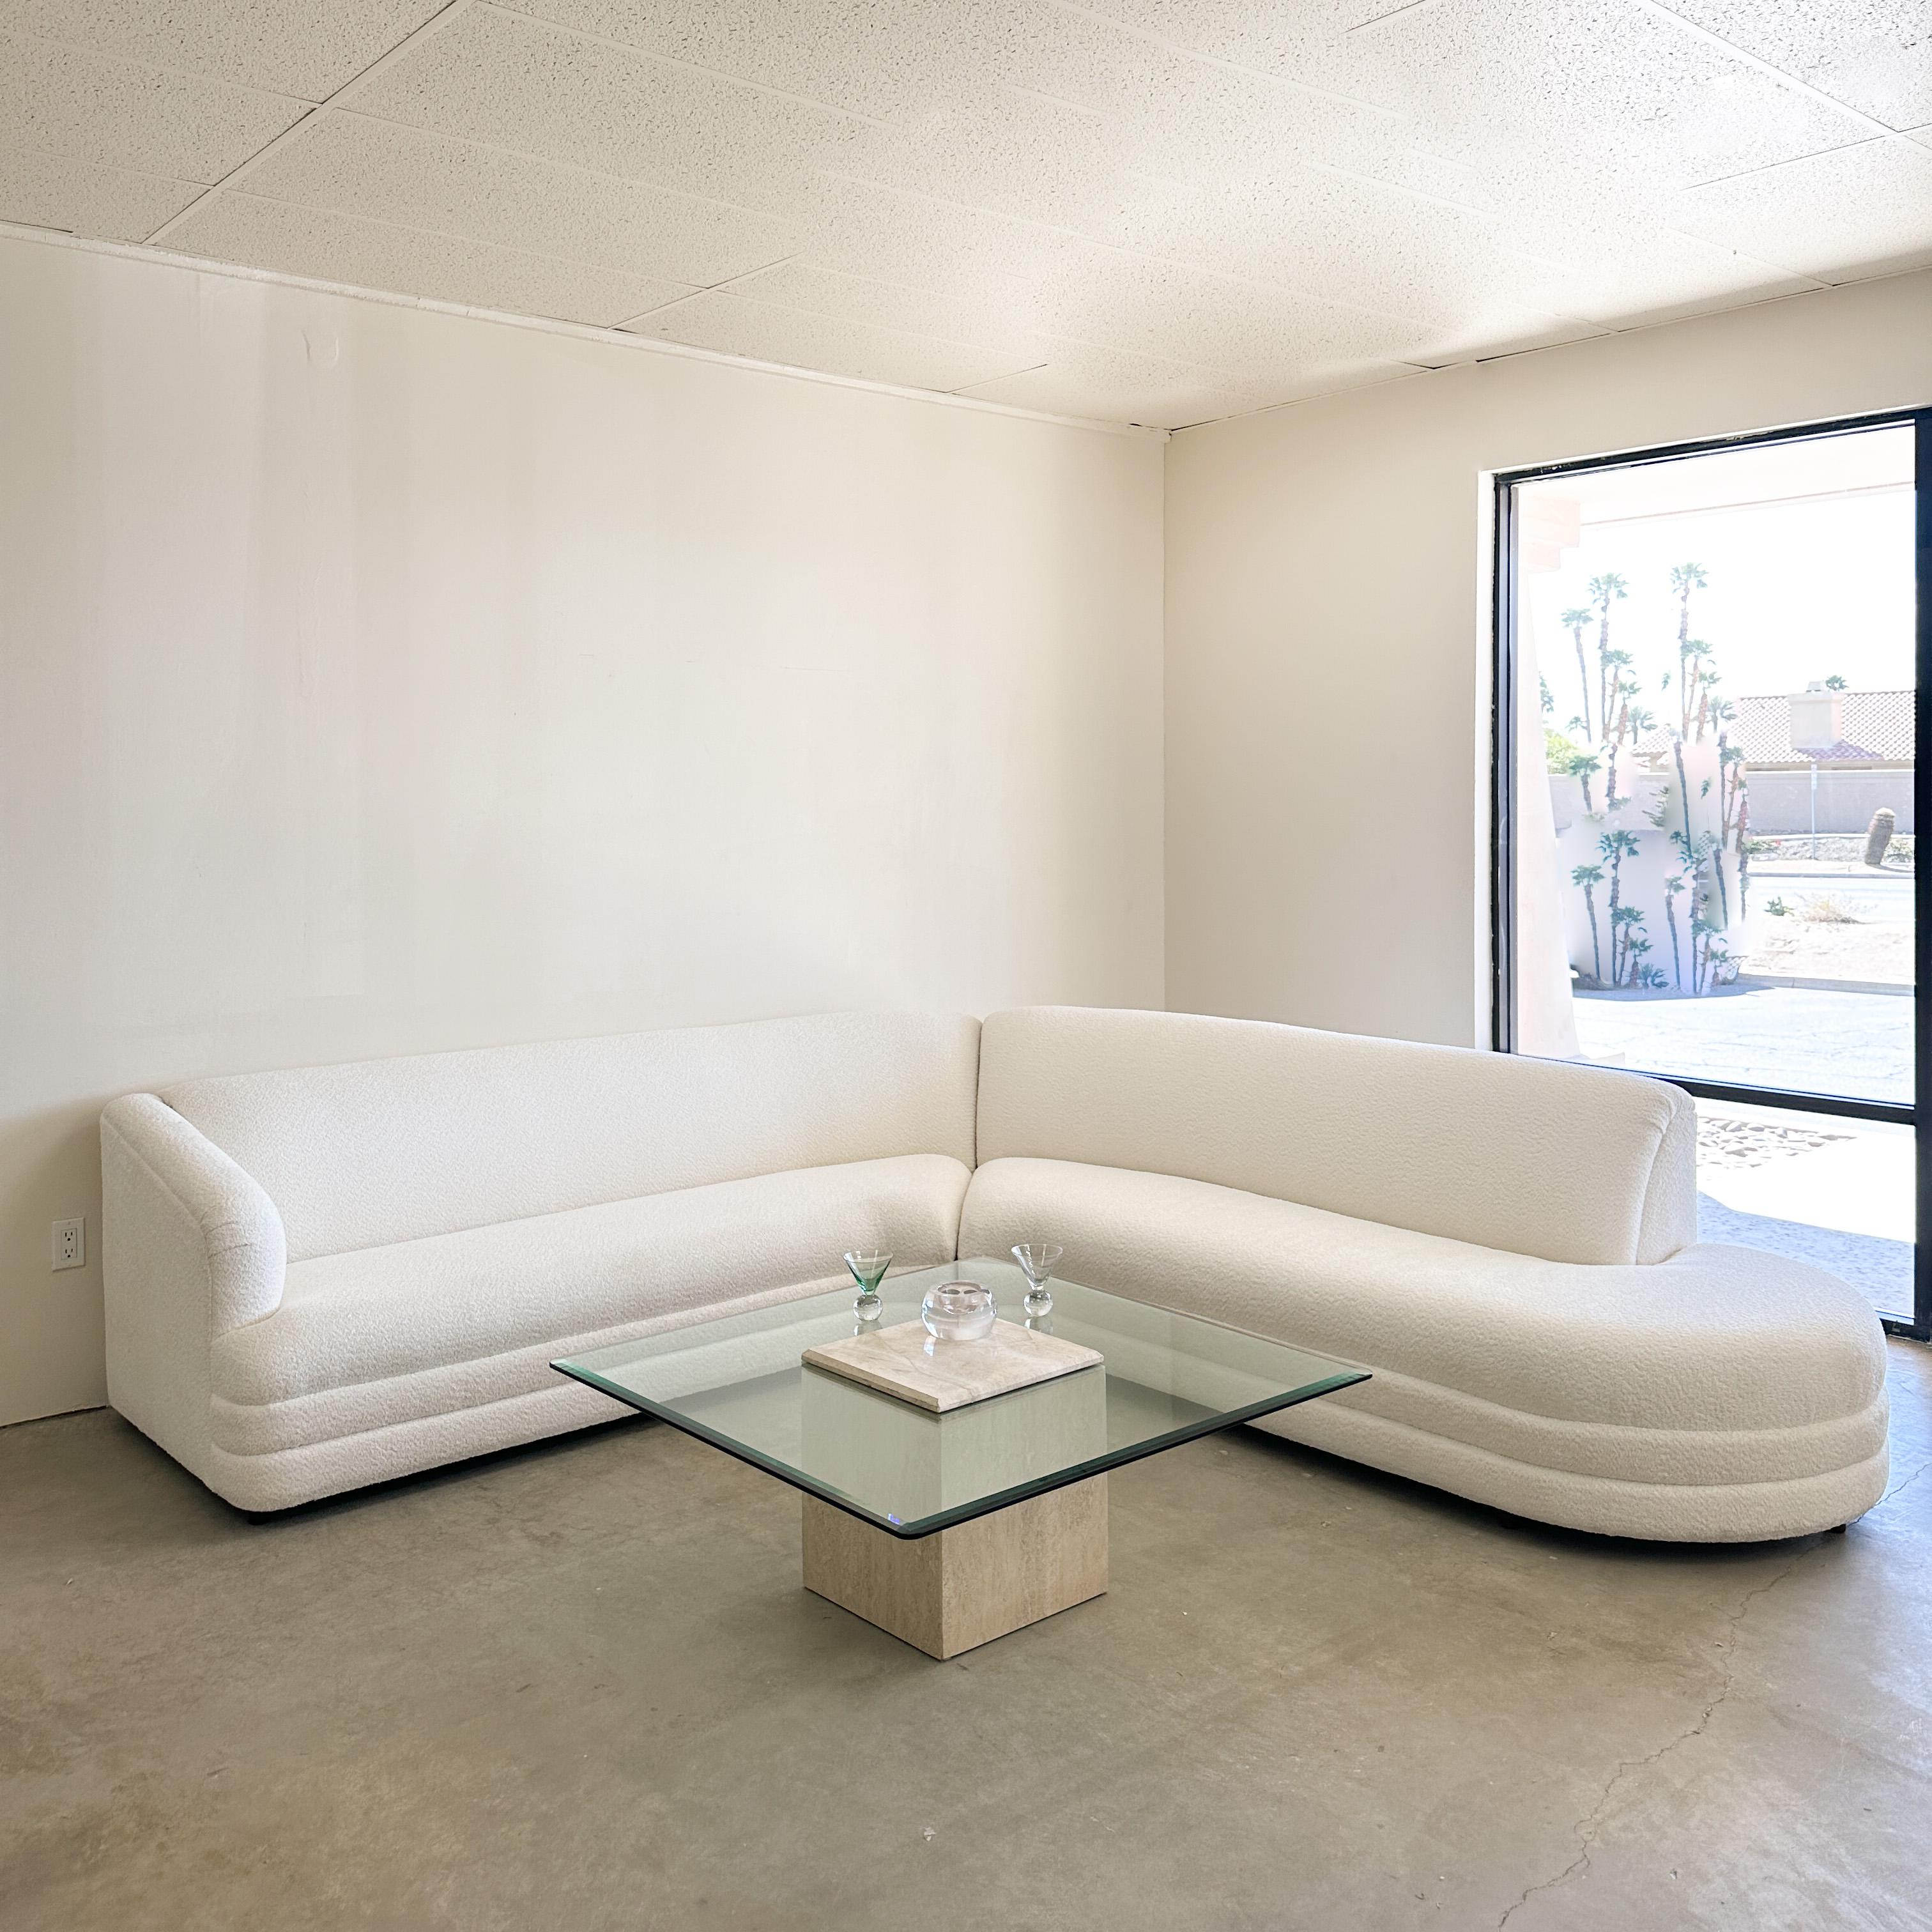 Vintage Vladimir Kagan sectional sofa Modular sofa Postmodern MCM Minimalist Retro 1970s-1980s

The sofa comes in 2 sections. Newly Upholstered with an off-white boucle. 
The fabric has great texture. 

Color: Off White

Condition:
The sofa